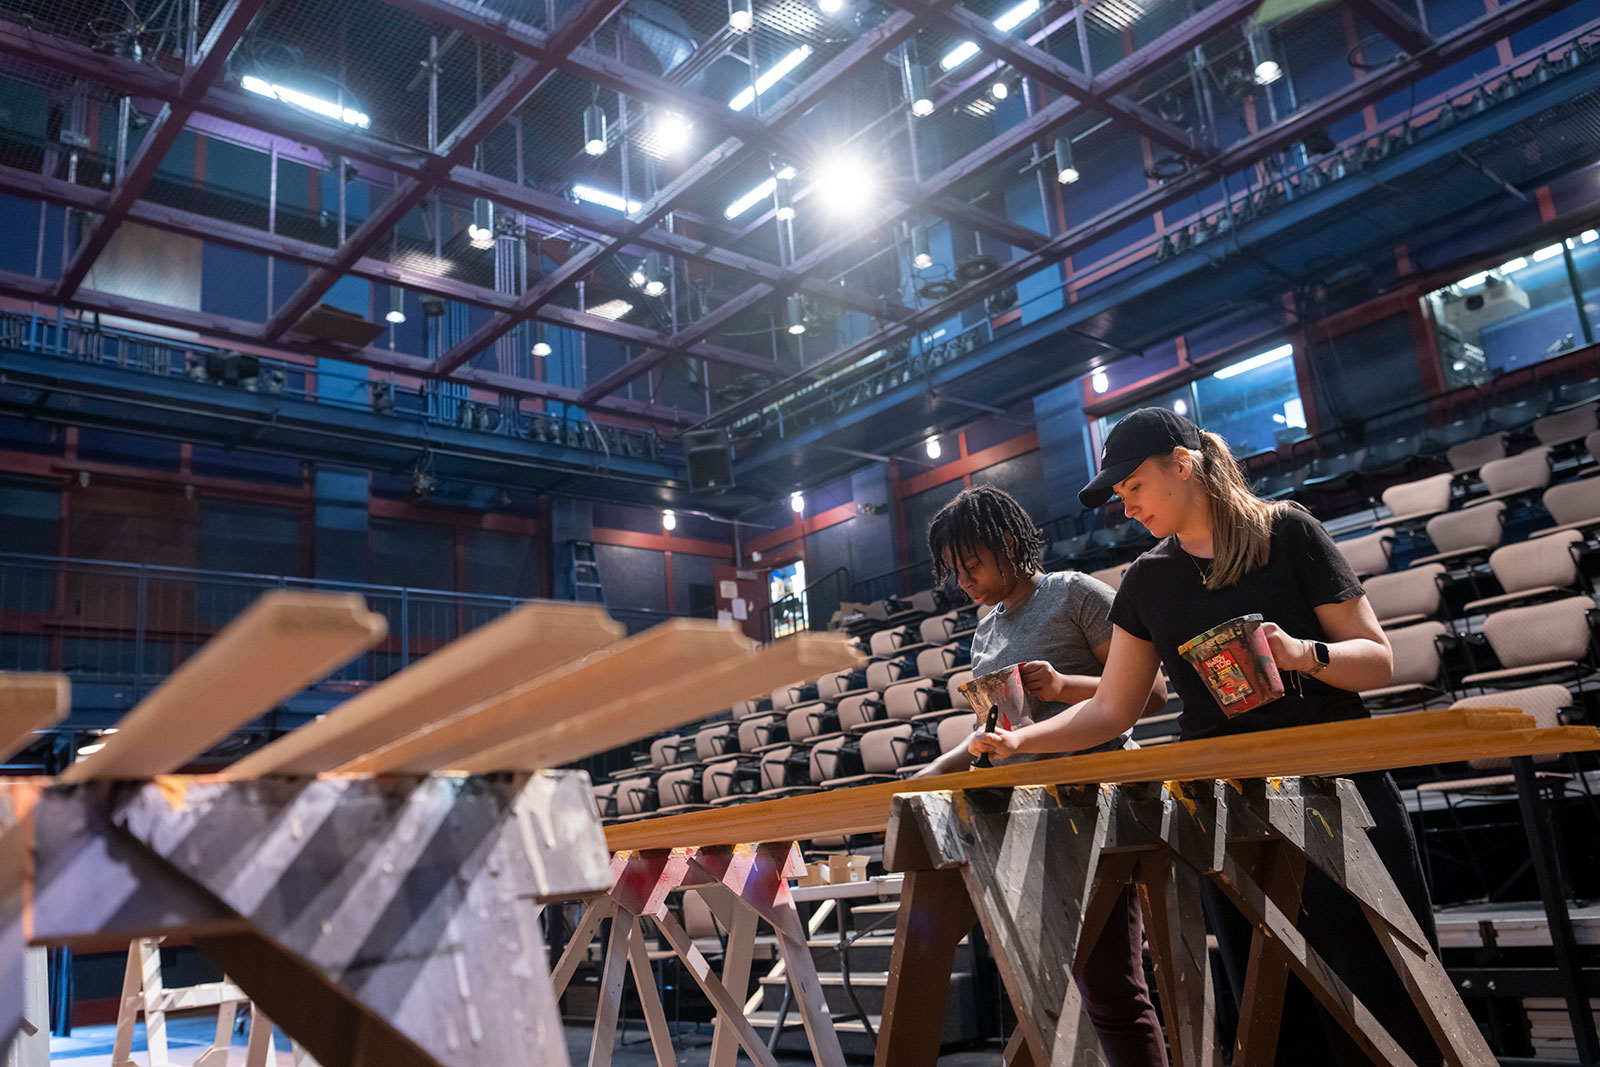 Two students painting stage components on the Yulman Theater stage.